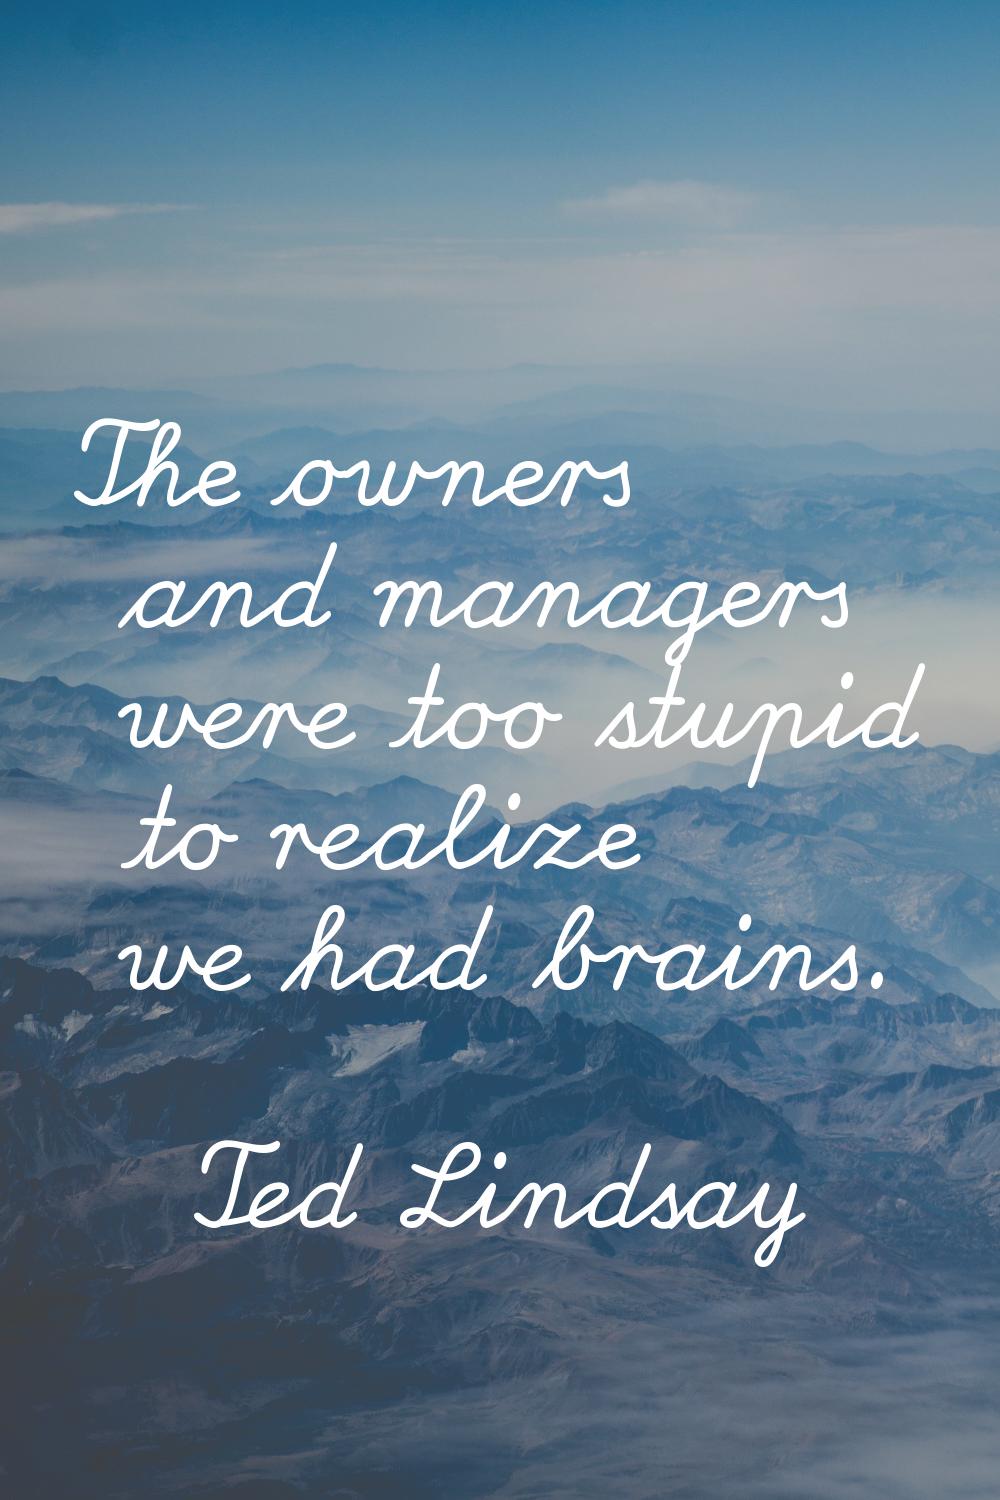 The owners and managers were too stupid to realize we had brains.